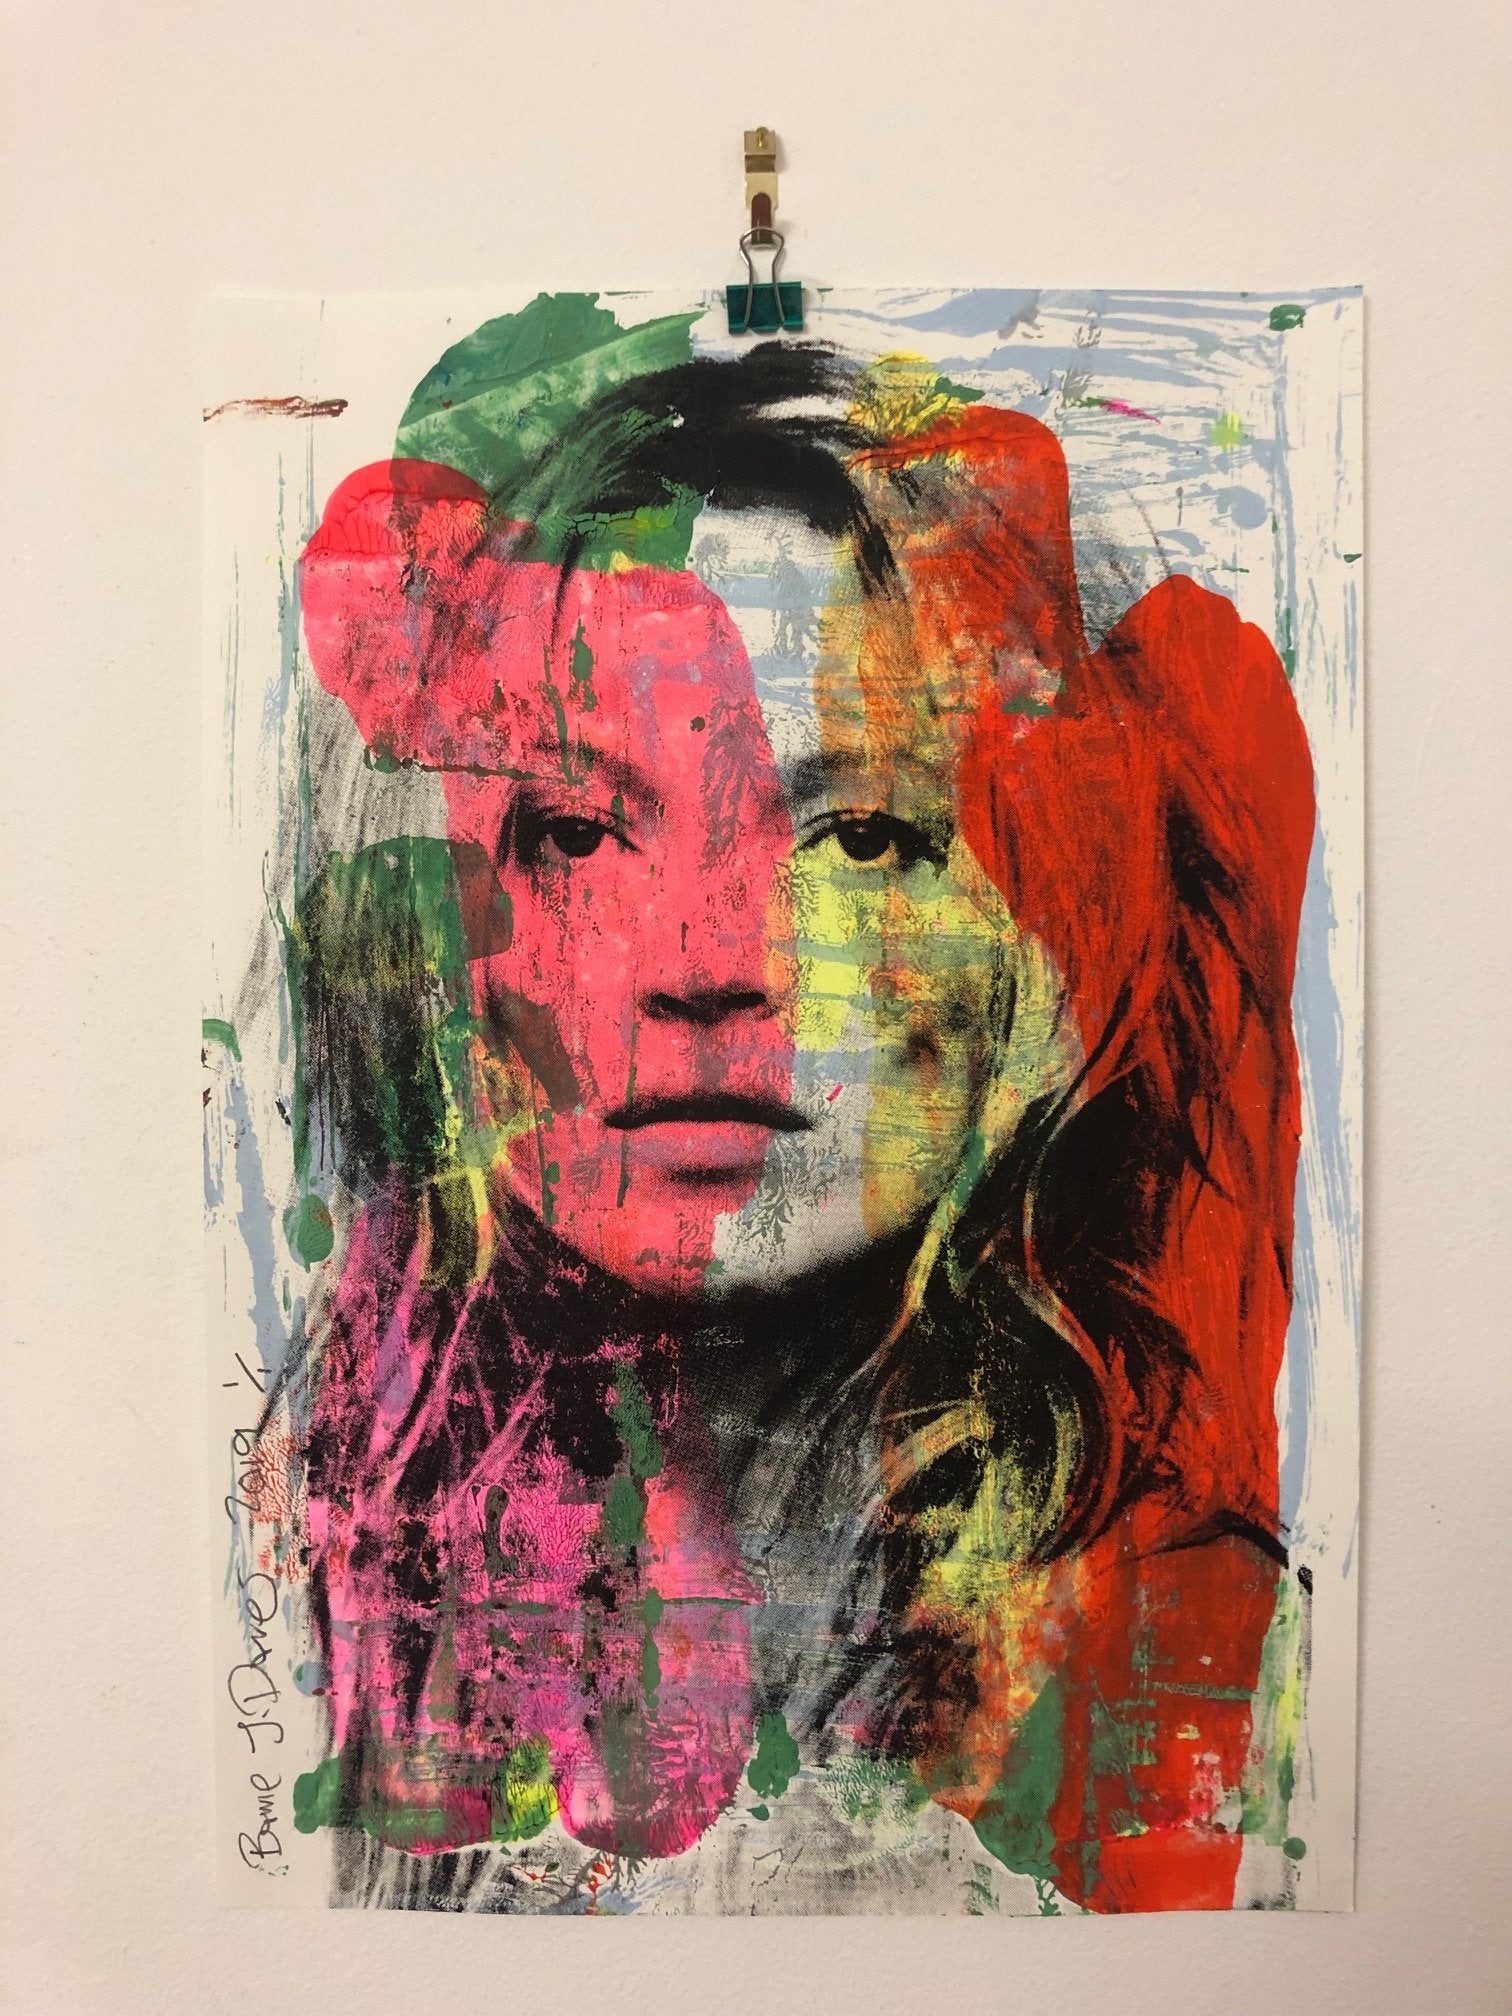 Super Kate Print by Barrie J Davies 2019 - unframed Silkscreen print on paper (hand finished) edition of 1/1 - A3 size 29cm x 42cm. Barrie J Davies is an Artist - Pop Art and Street art inspired Artist based in Brighton England UK - Pop Art Paintings, Street Art Prints & Editions available